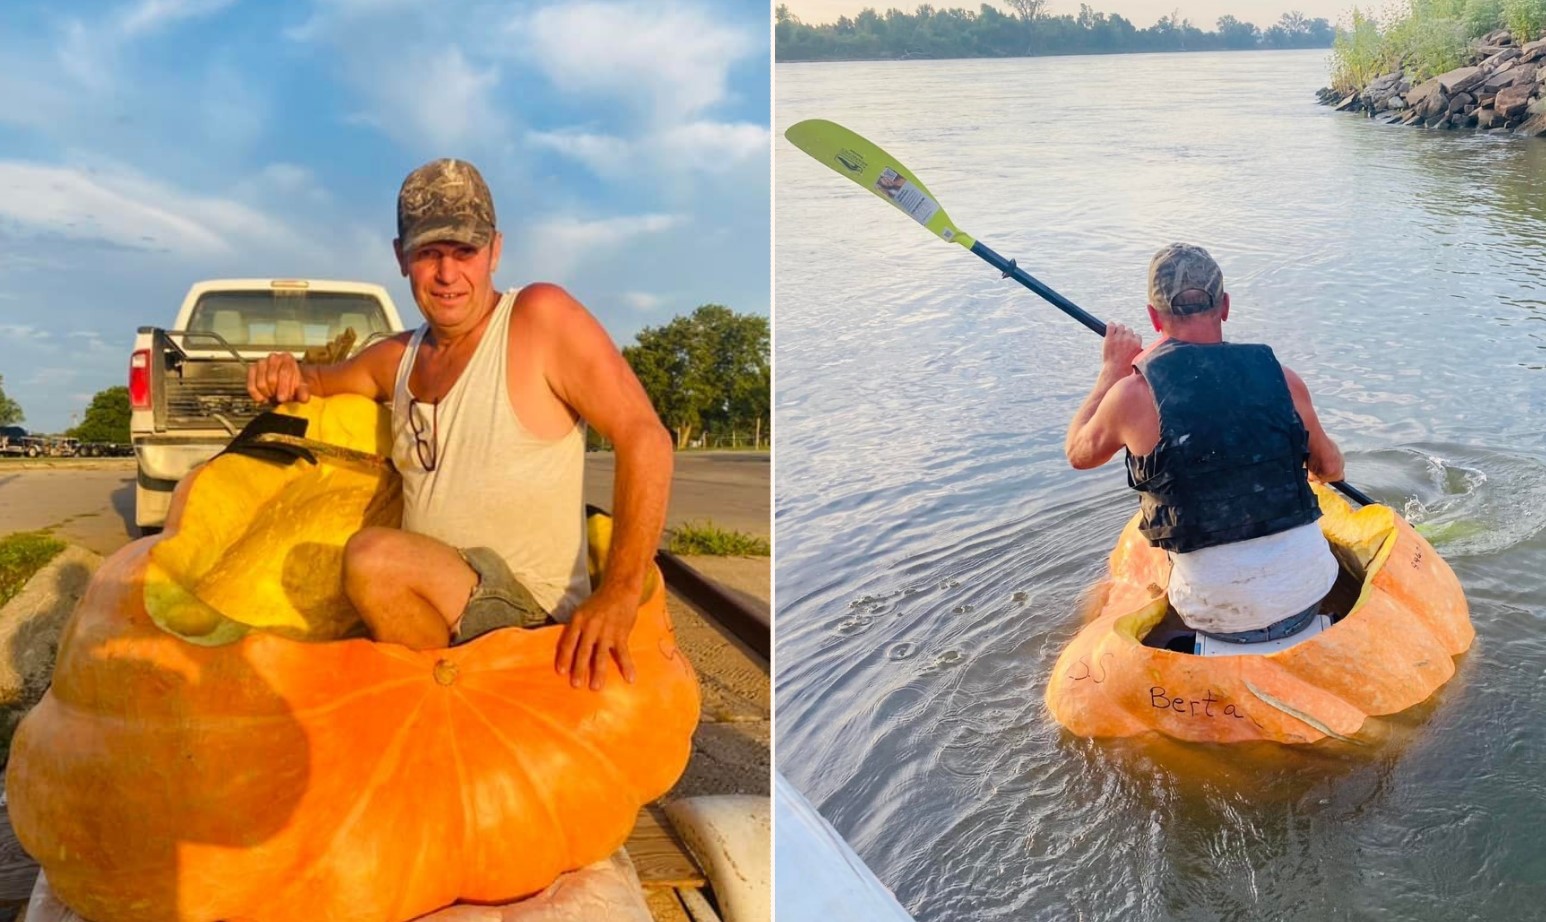 Bloke sets world record by floating downriver in a massive pumpkin